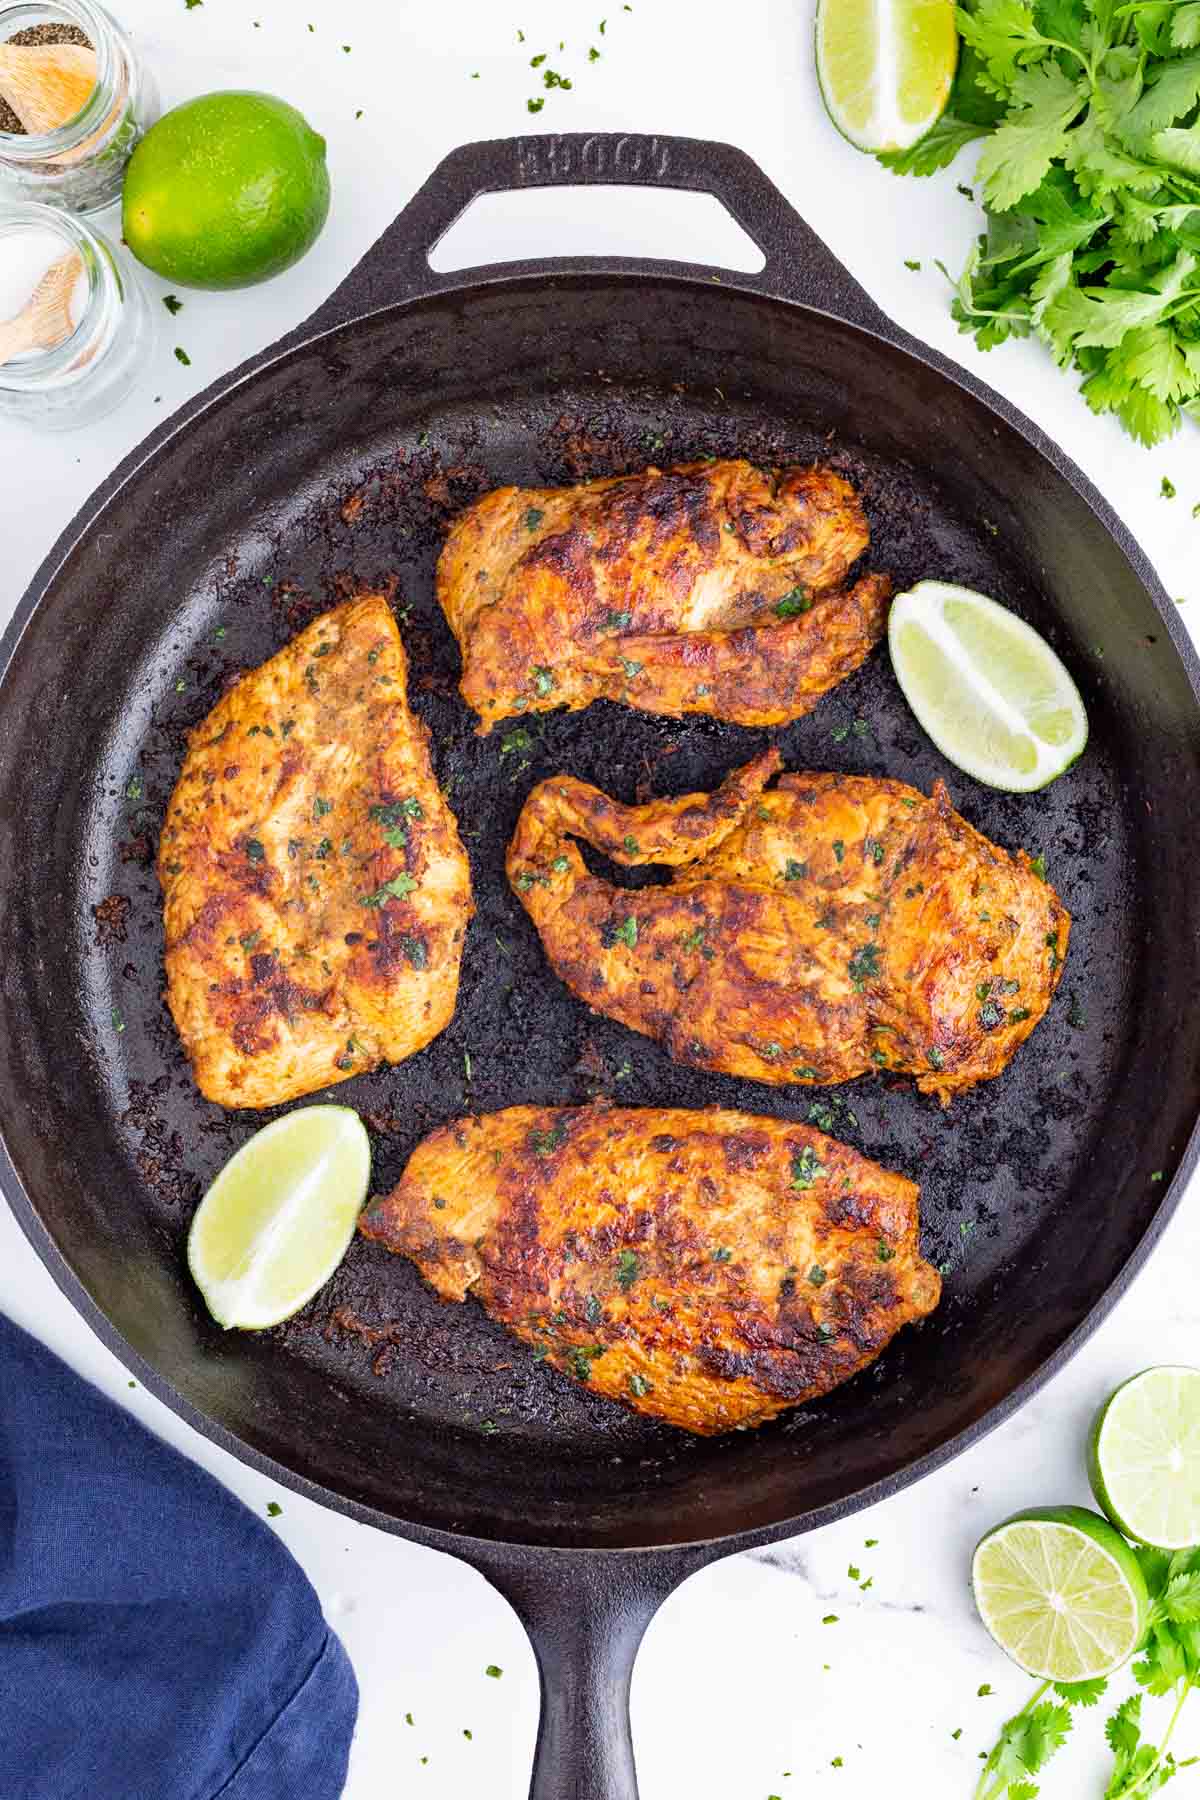 Chipotle chicken is cooked in a skillet.